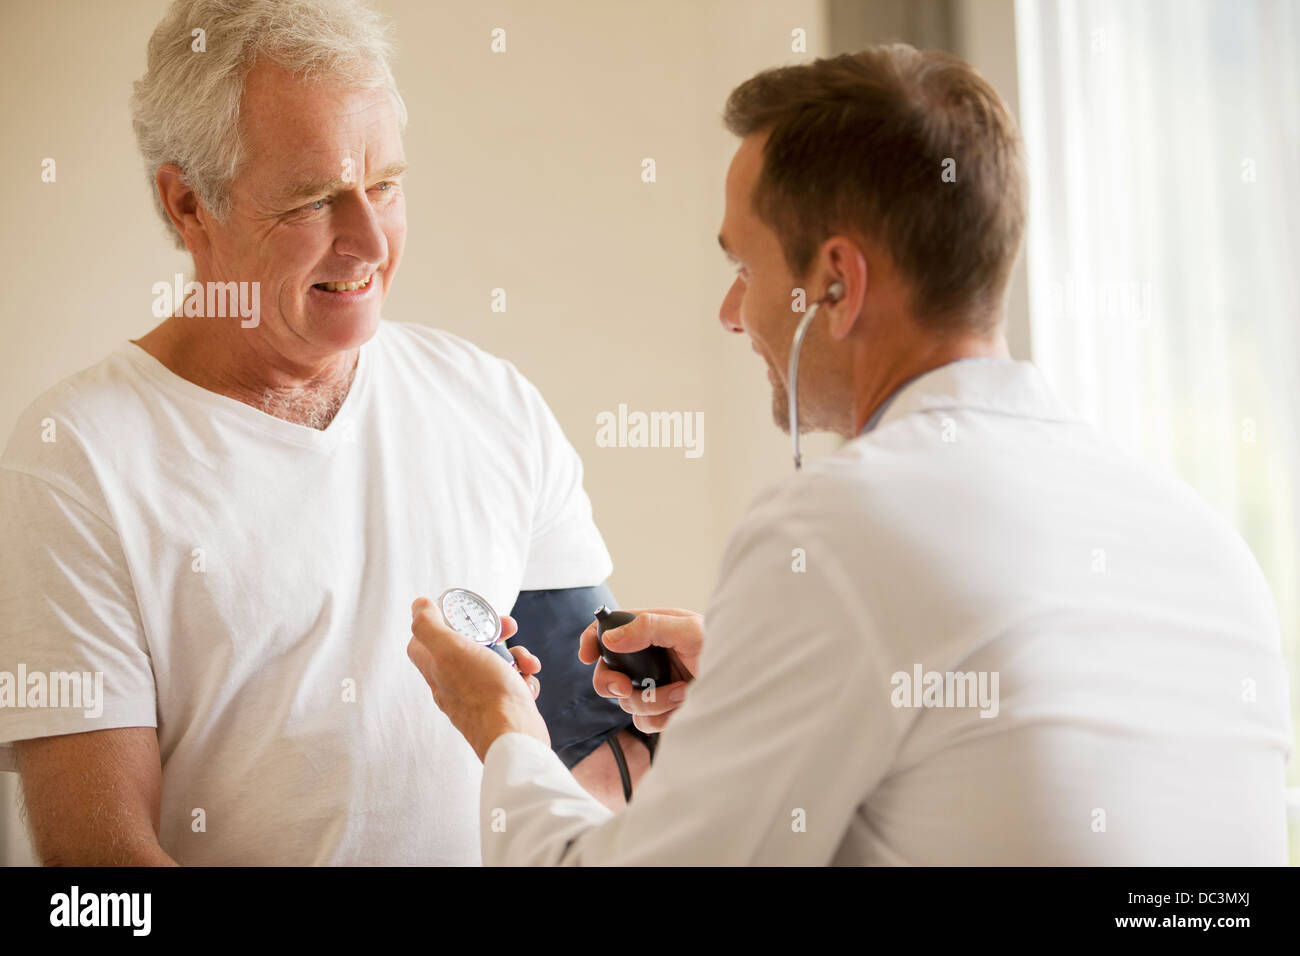 Doctor checking senior man's blood pressure in doctor's office Stock Photo